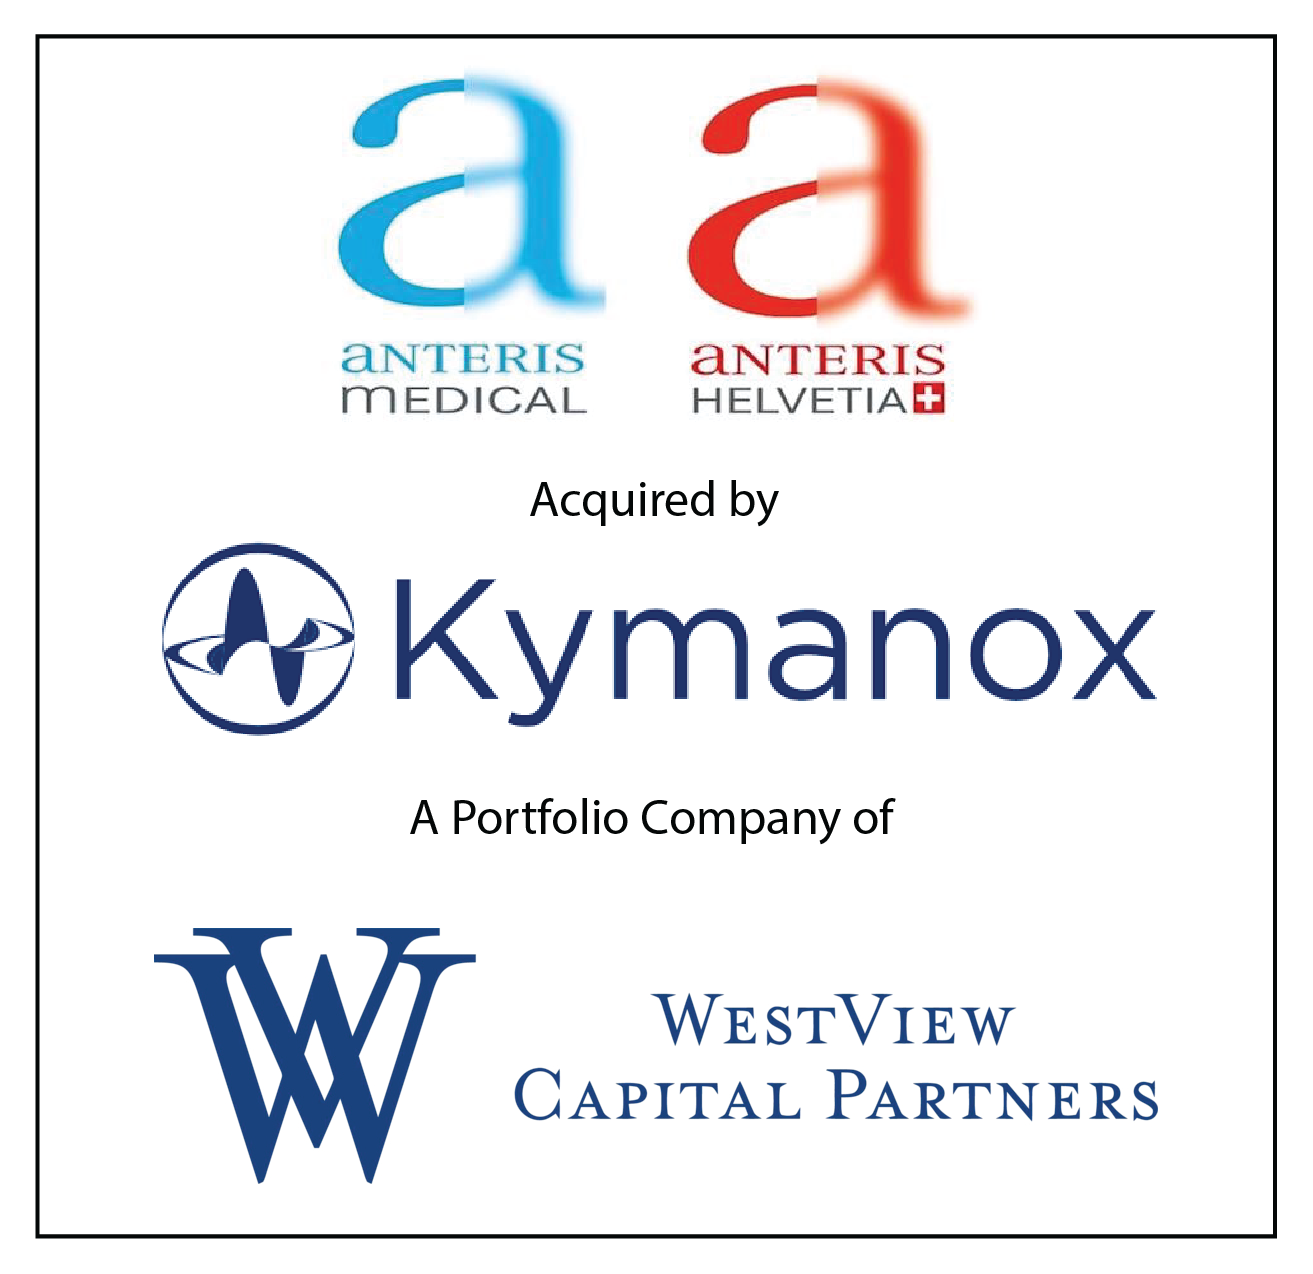 anteris Acquired by Kymanox, a Portfolio Company of Westview Capital Partners, to Expand Injectable Combination Product Development Capabilities Globally